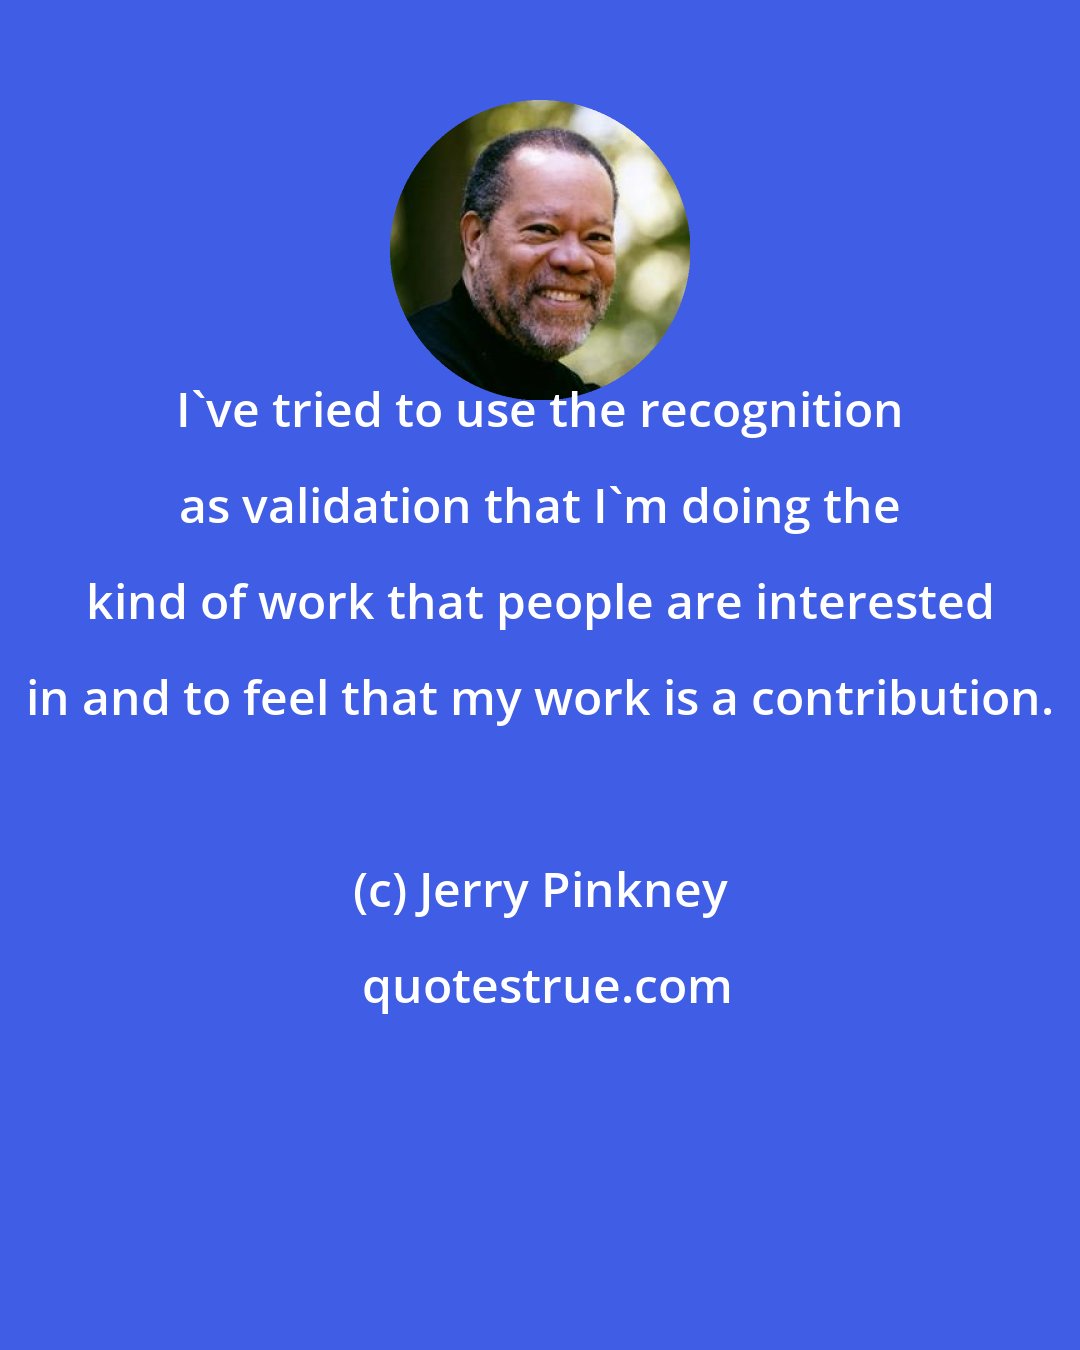 Jerry Pinkney: I've tried to use the recognition as validation that I'm doing the kind of work that people are interested in and to feel that my work is a contribution.